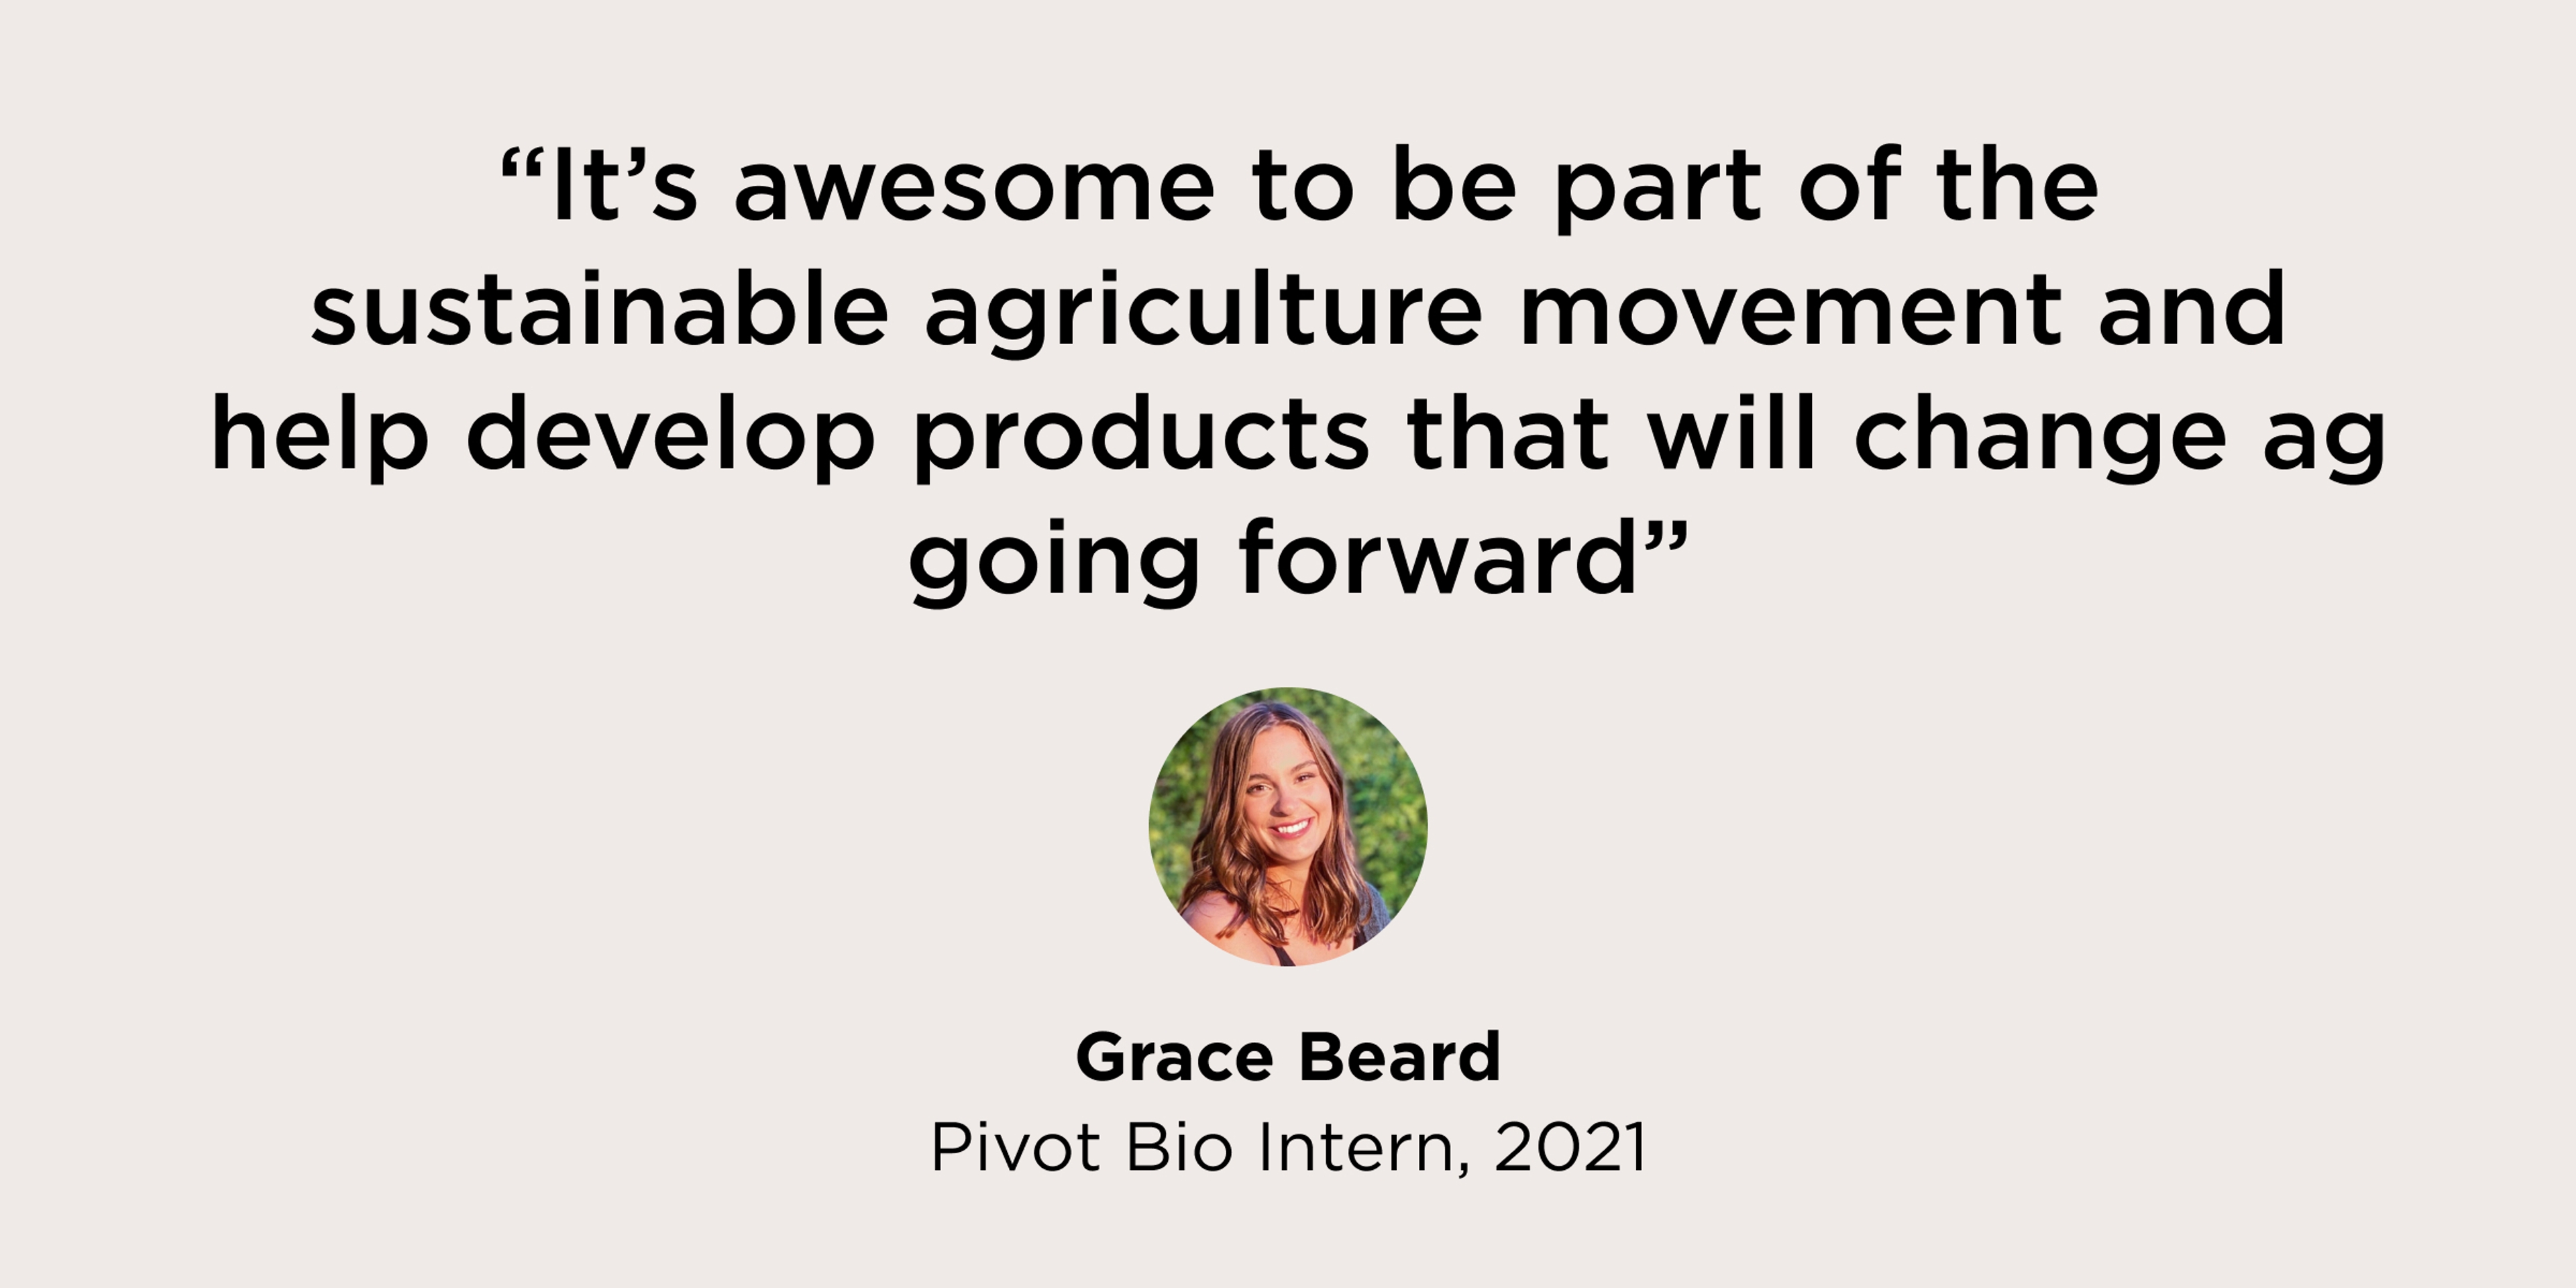 Quote from Grace, a 2021 Intern, that says "It's awesome to be part of the sustainable agriculture movement and help develop products that will change ag going forward"